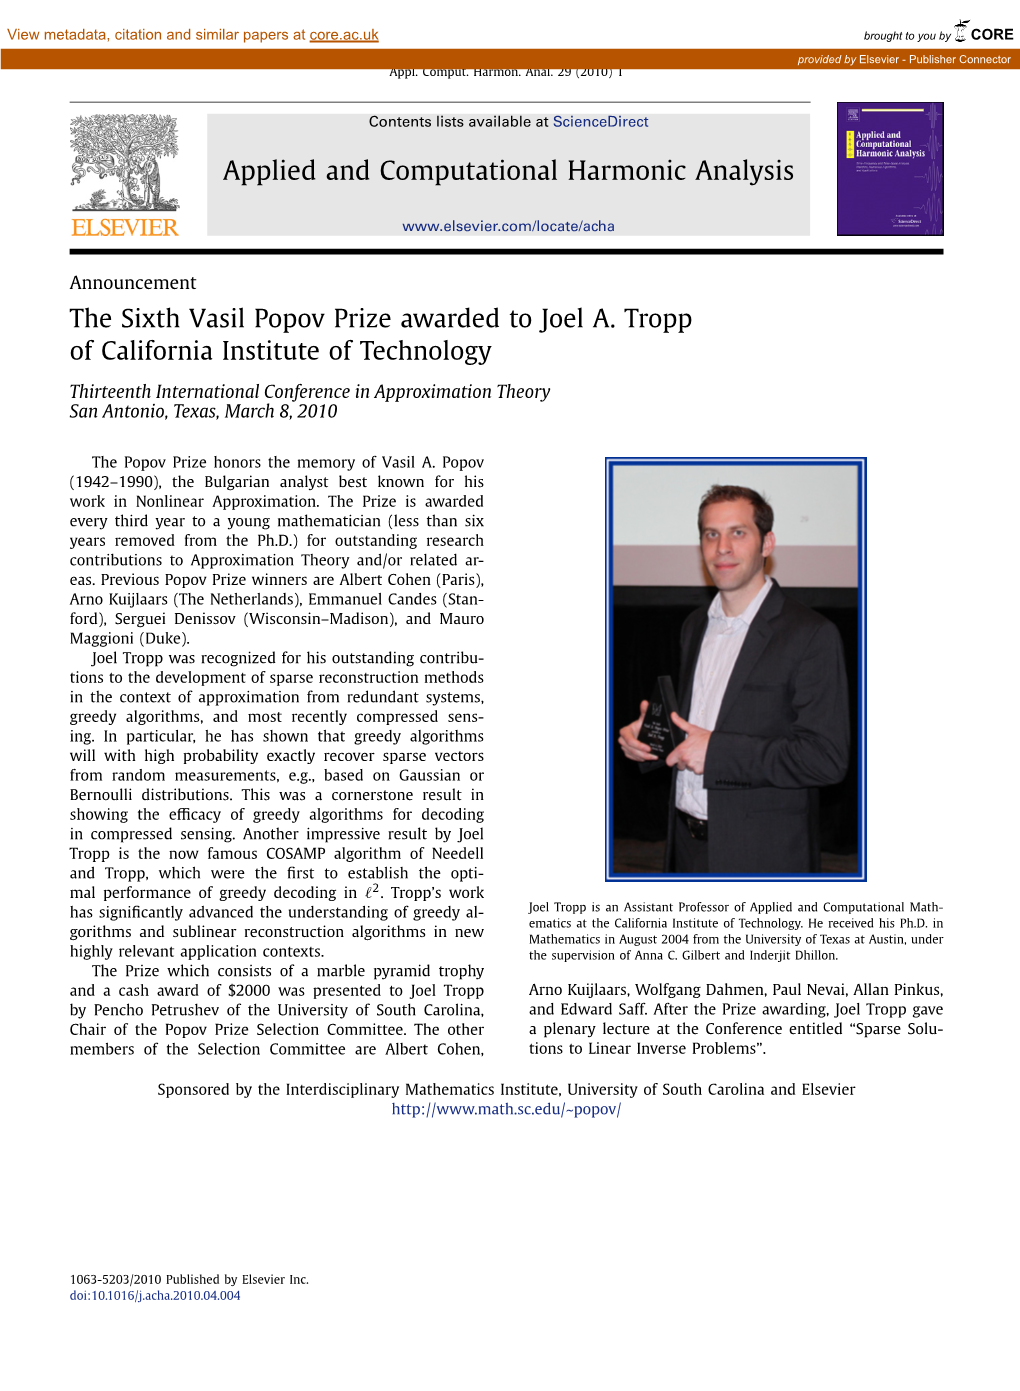 The Sixth Vasil Popov Prize Awarded to Joel A. Tropp of California Institute of Technology